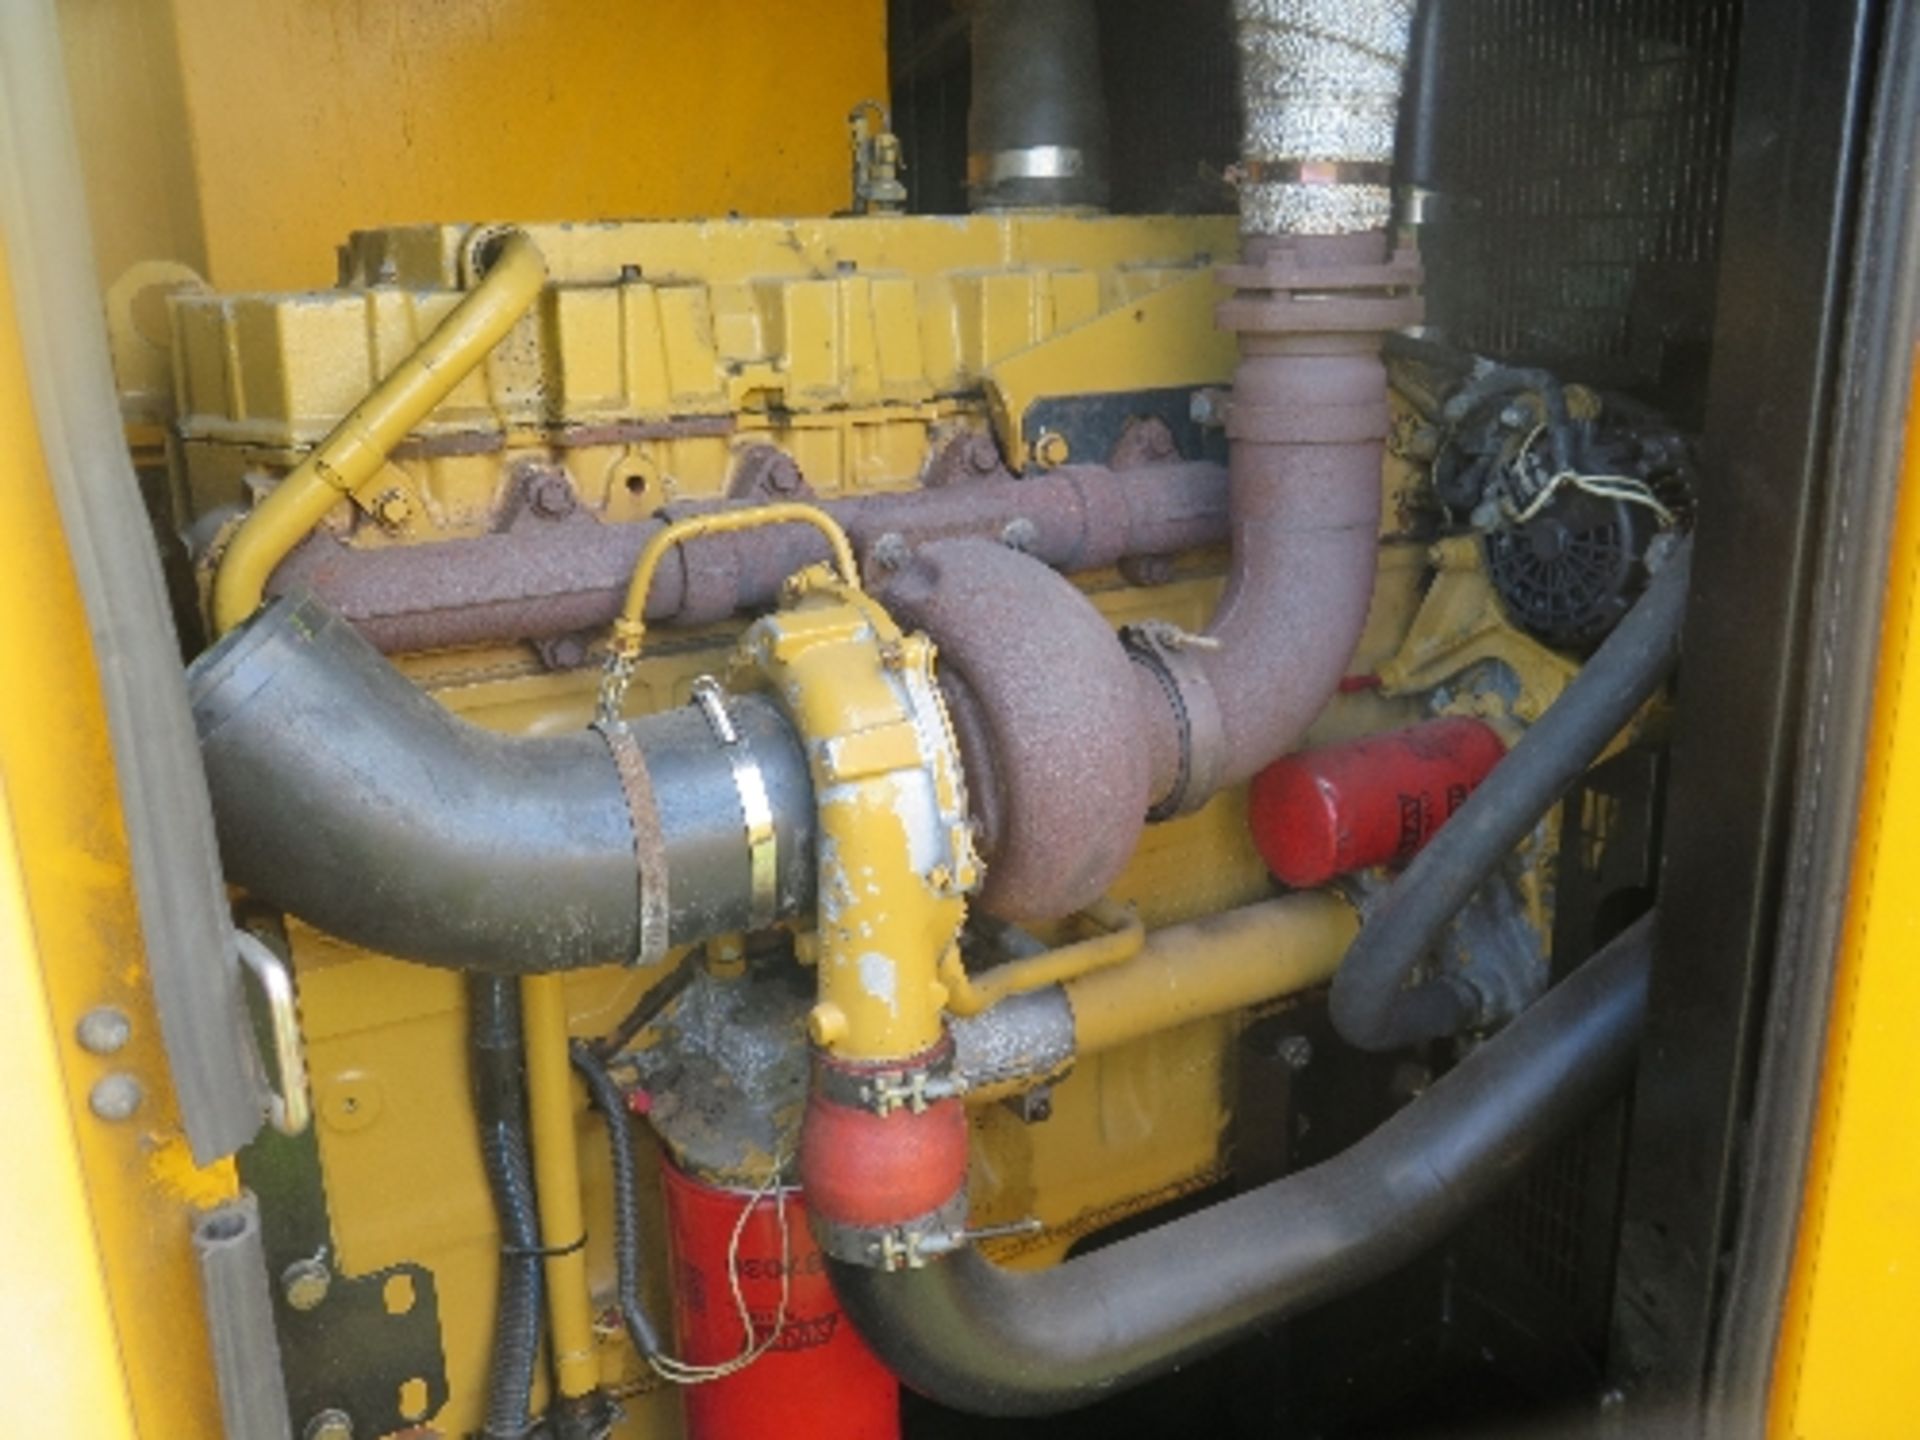 Caterpillar XQE200 generator 22896 hrs 157829
PERKINS - RUNS AND MAKES POWER
ALL LOTS are SOLD - Image 7 of 7